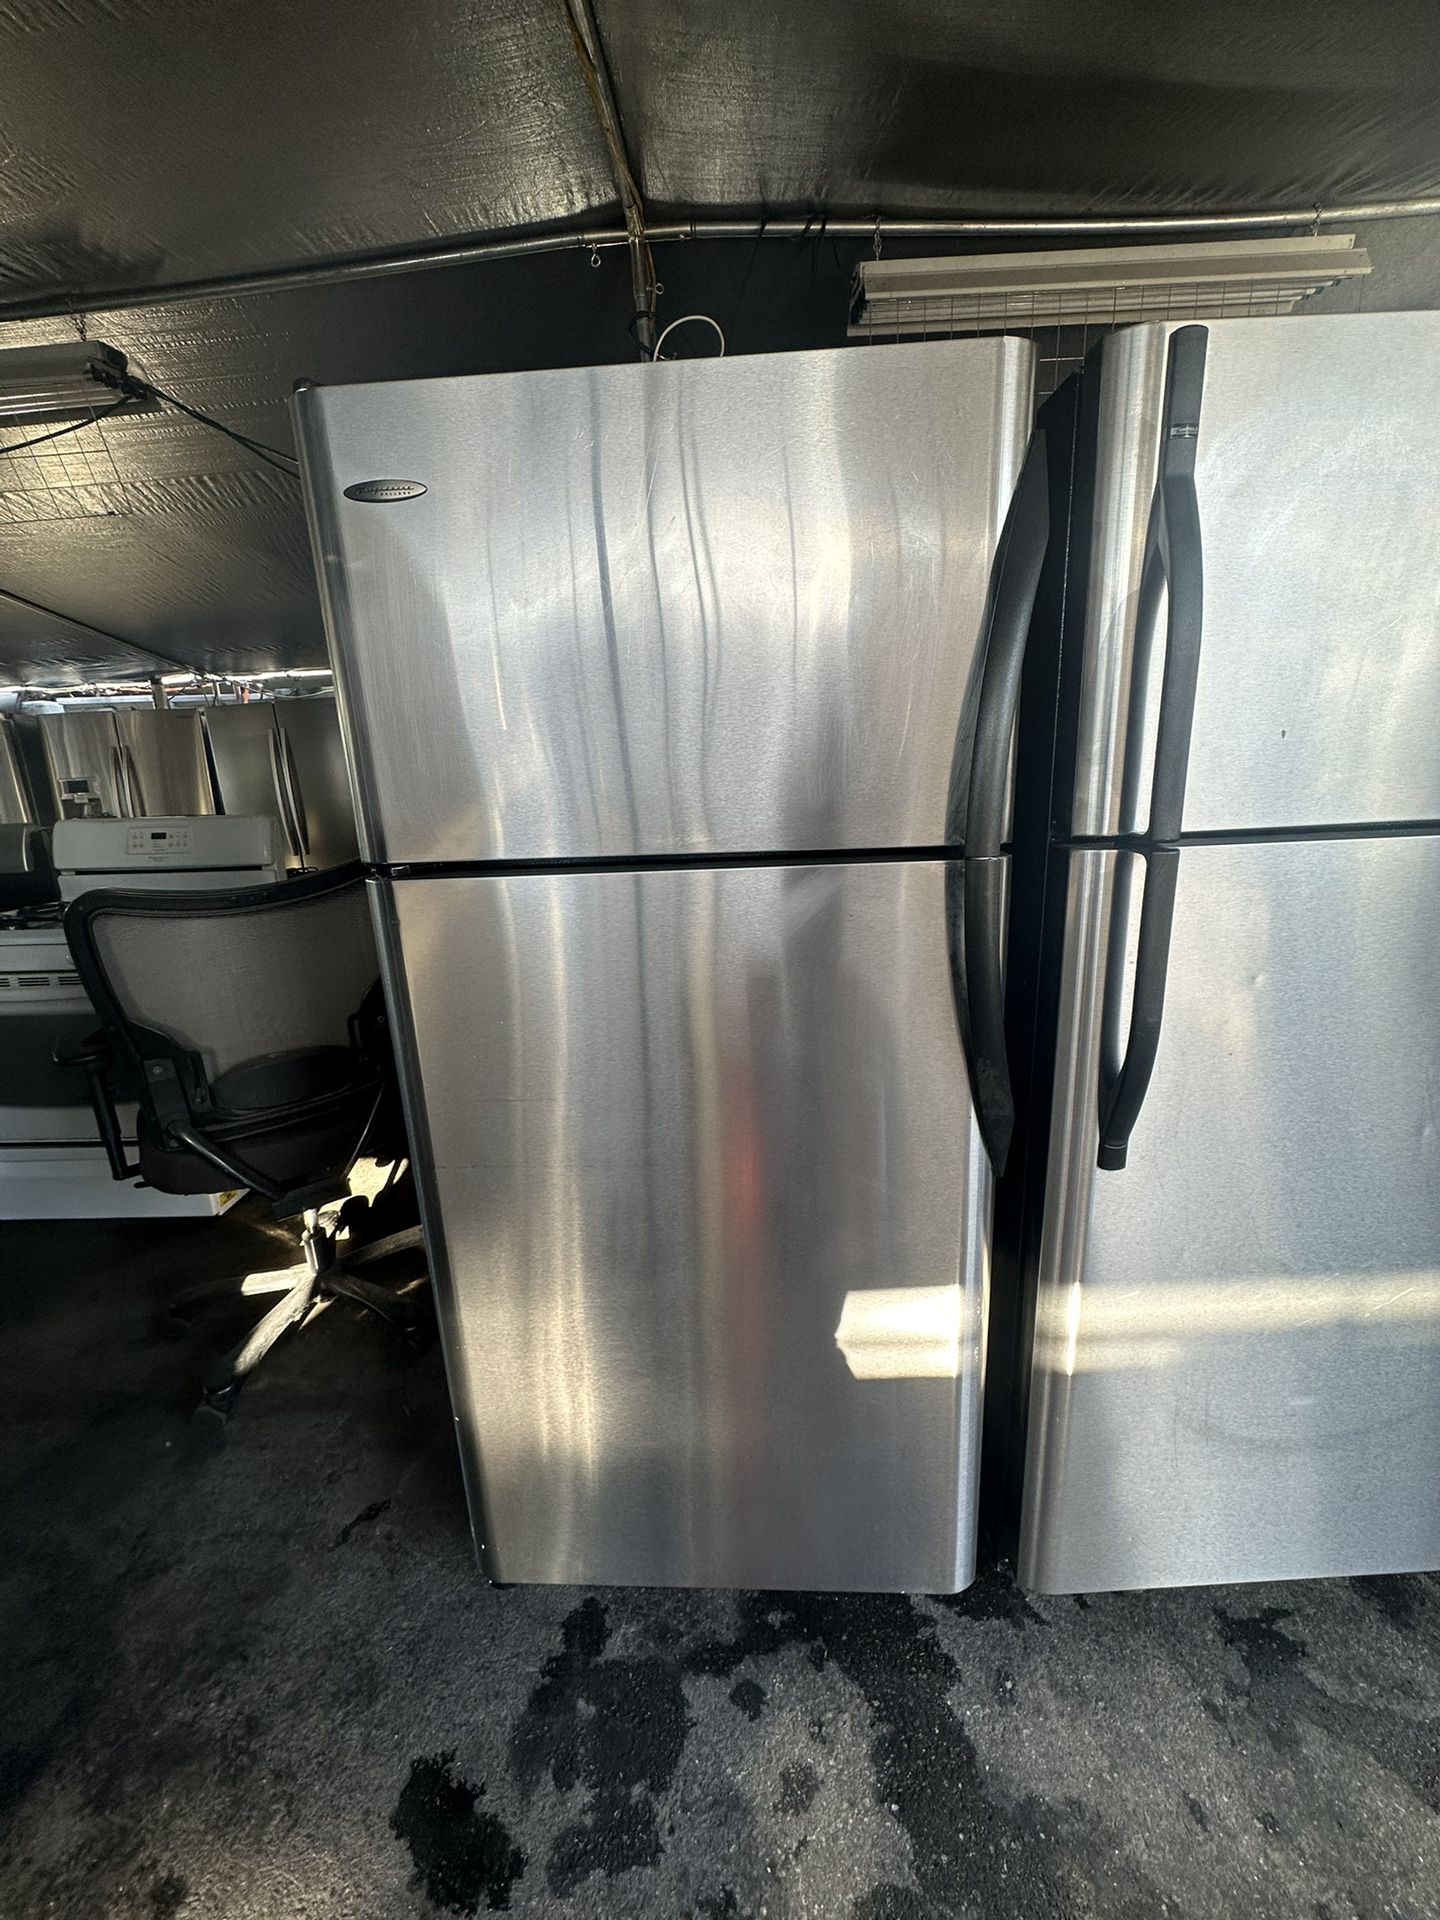 Silver Frigidaire Top Freezer Apt Size Stainless Steel Fridge We Deliver And Install👨🏻‍🔧🚚